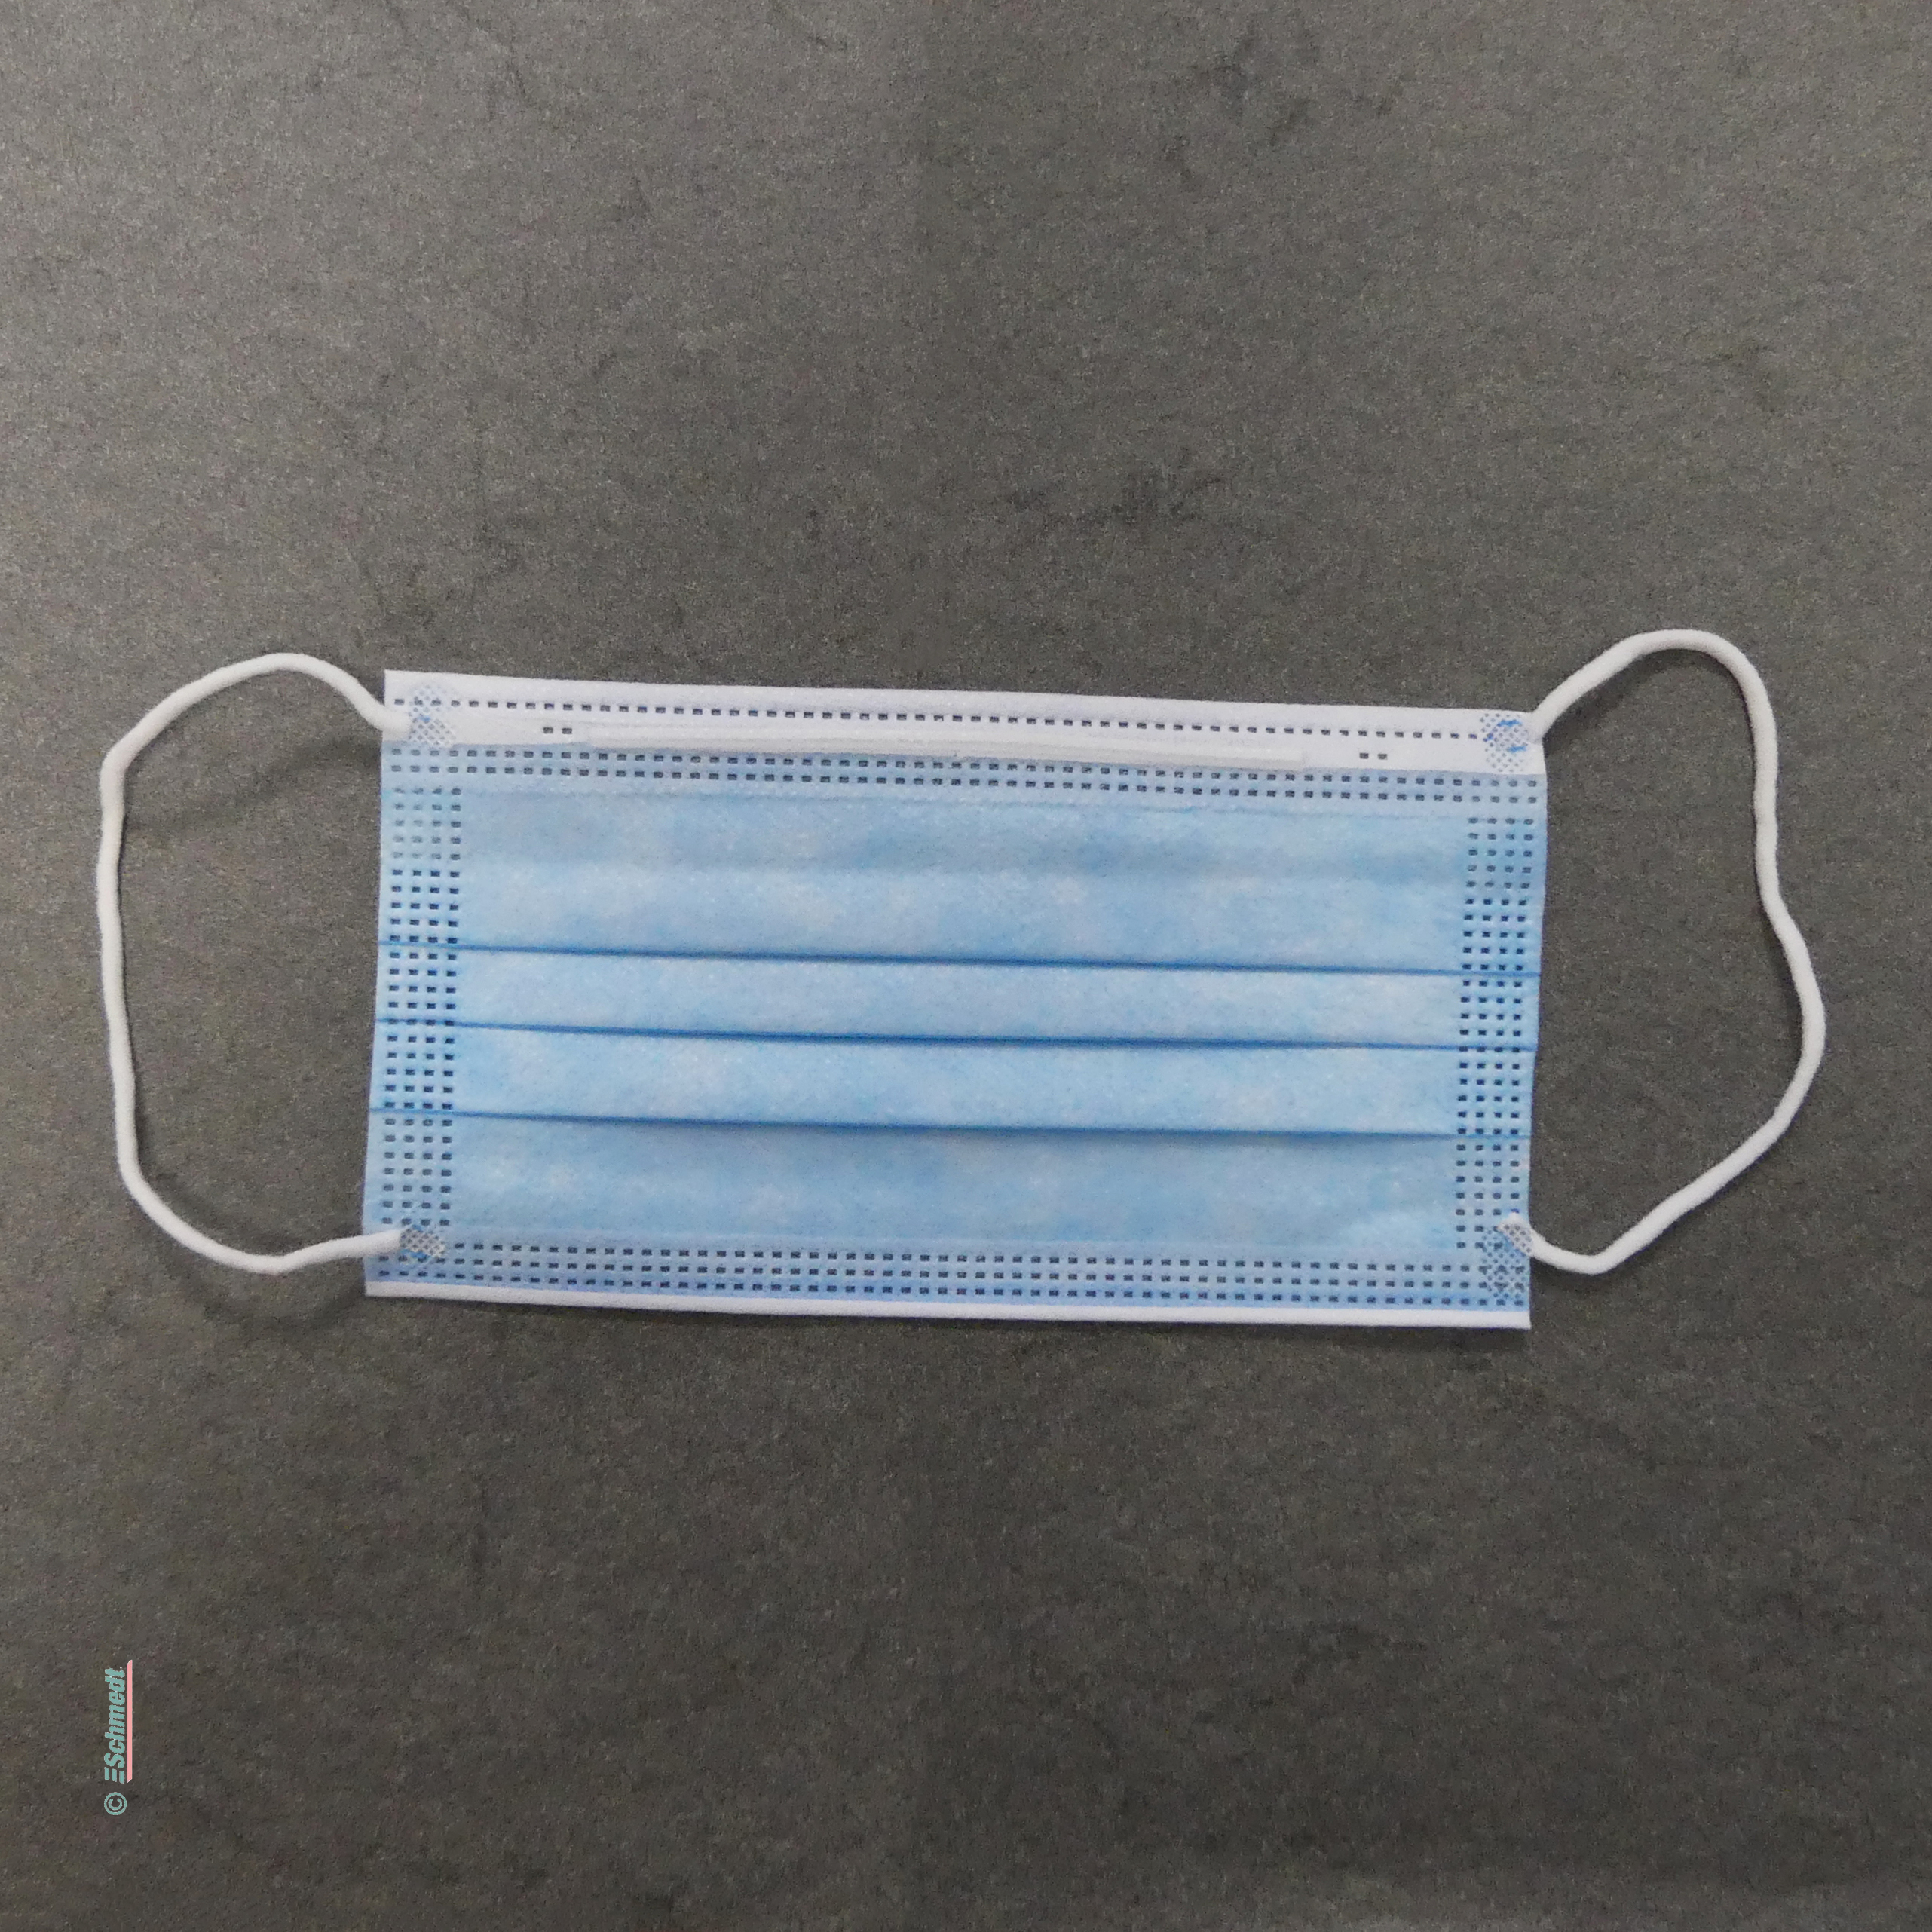 Surgical mask, blue - Type IIR, 3 layers / Box of 50 pcs - to protect the wearer from inhaling 
airborne bacteria... - image-1